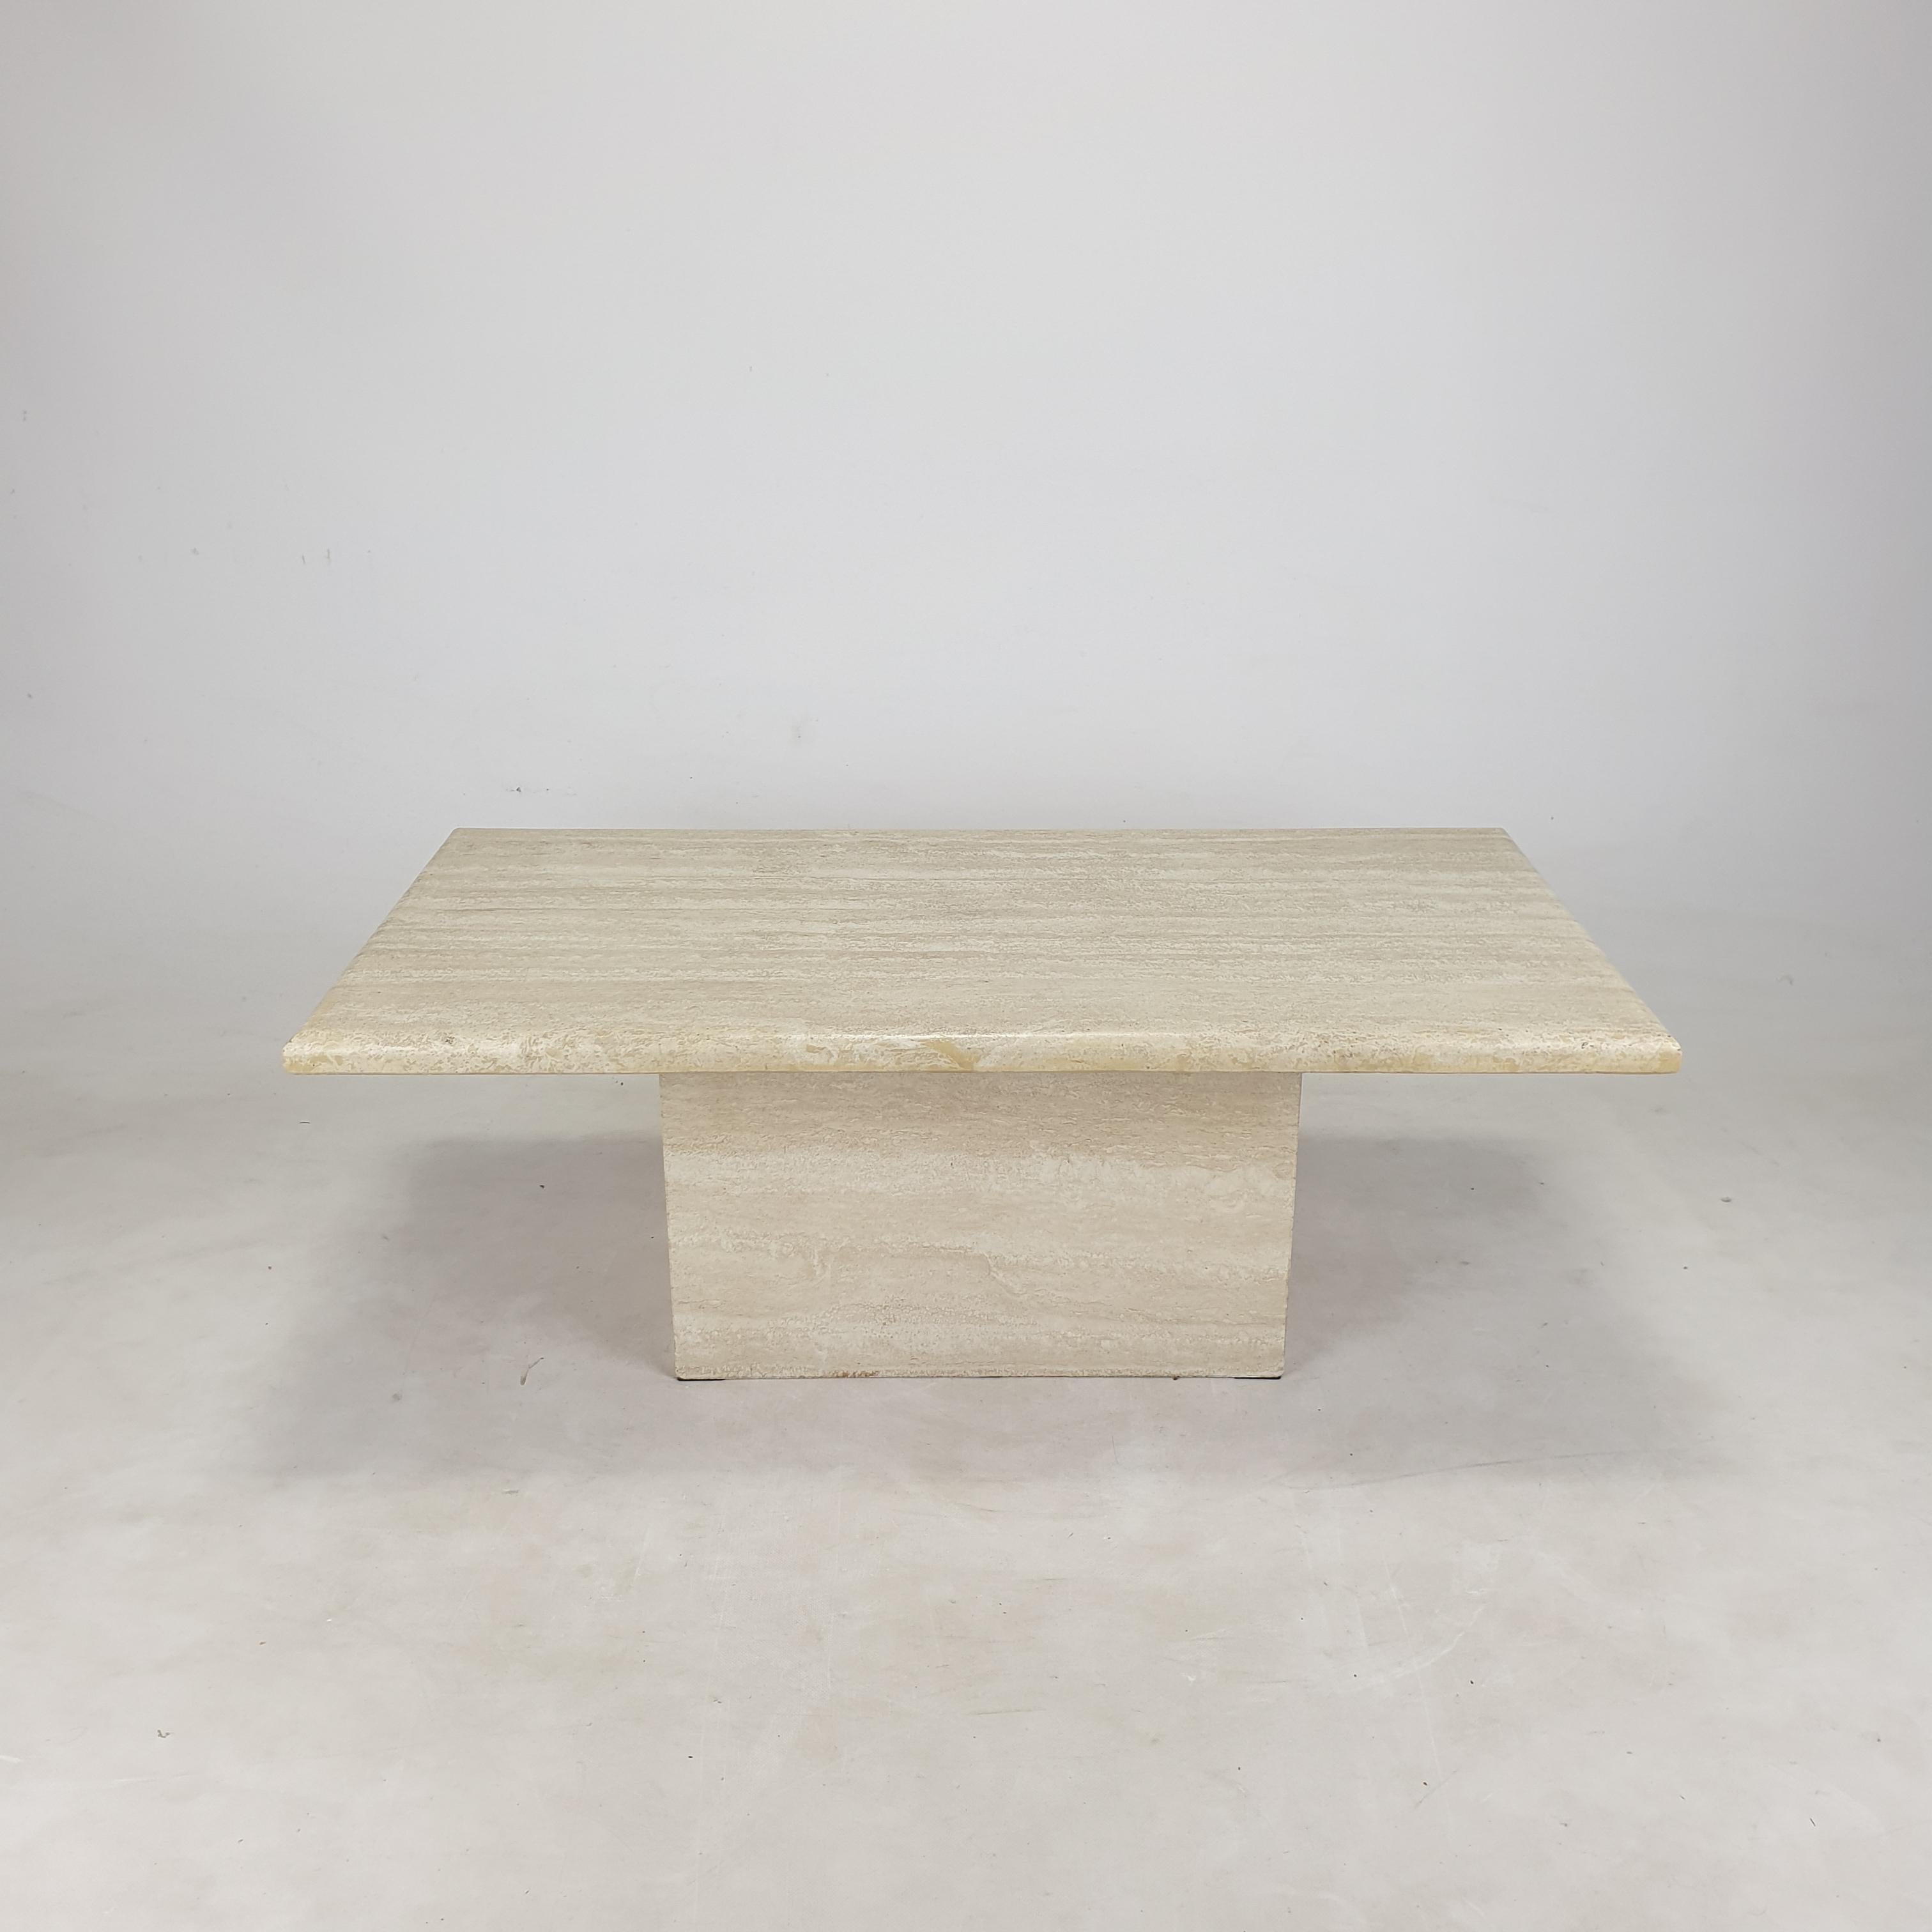 Very nice Italian coffee table from the 80's, handcrafted out of travertine. 

The plate and the base are made of very nice travertine.